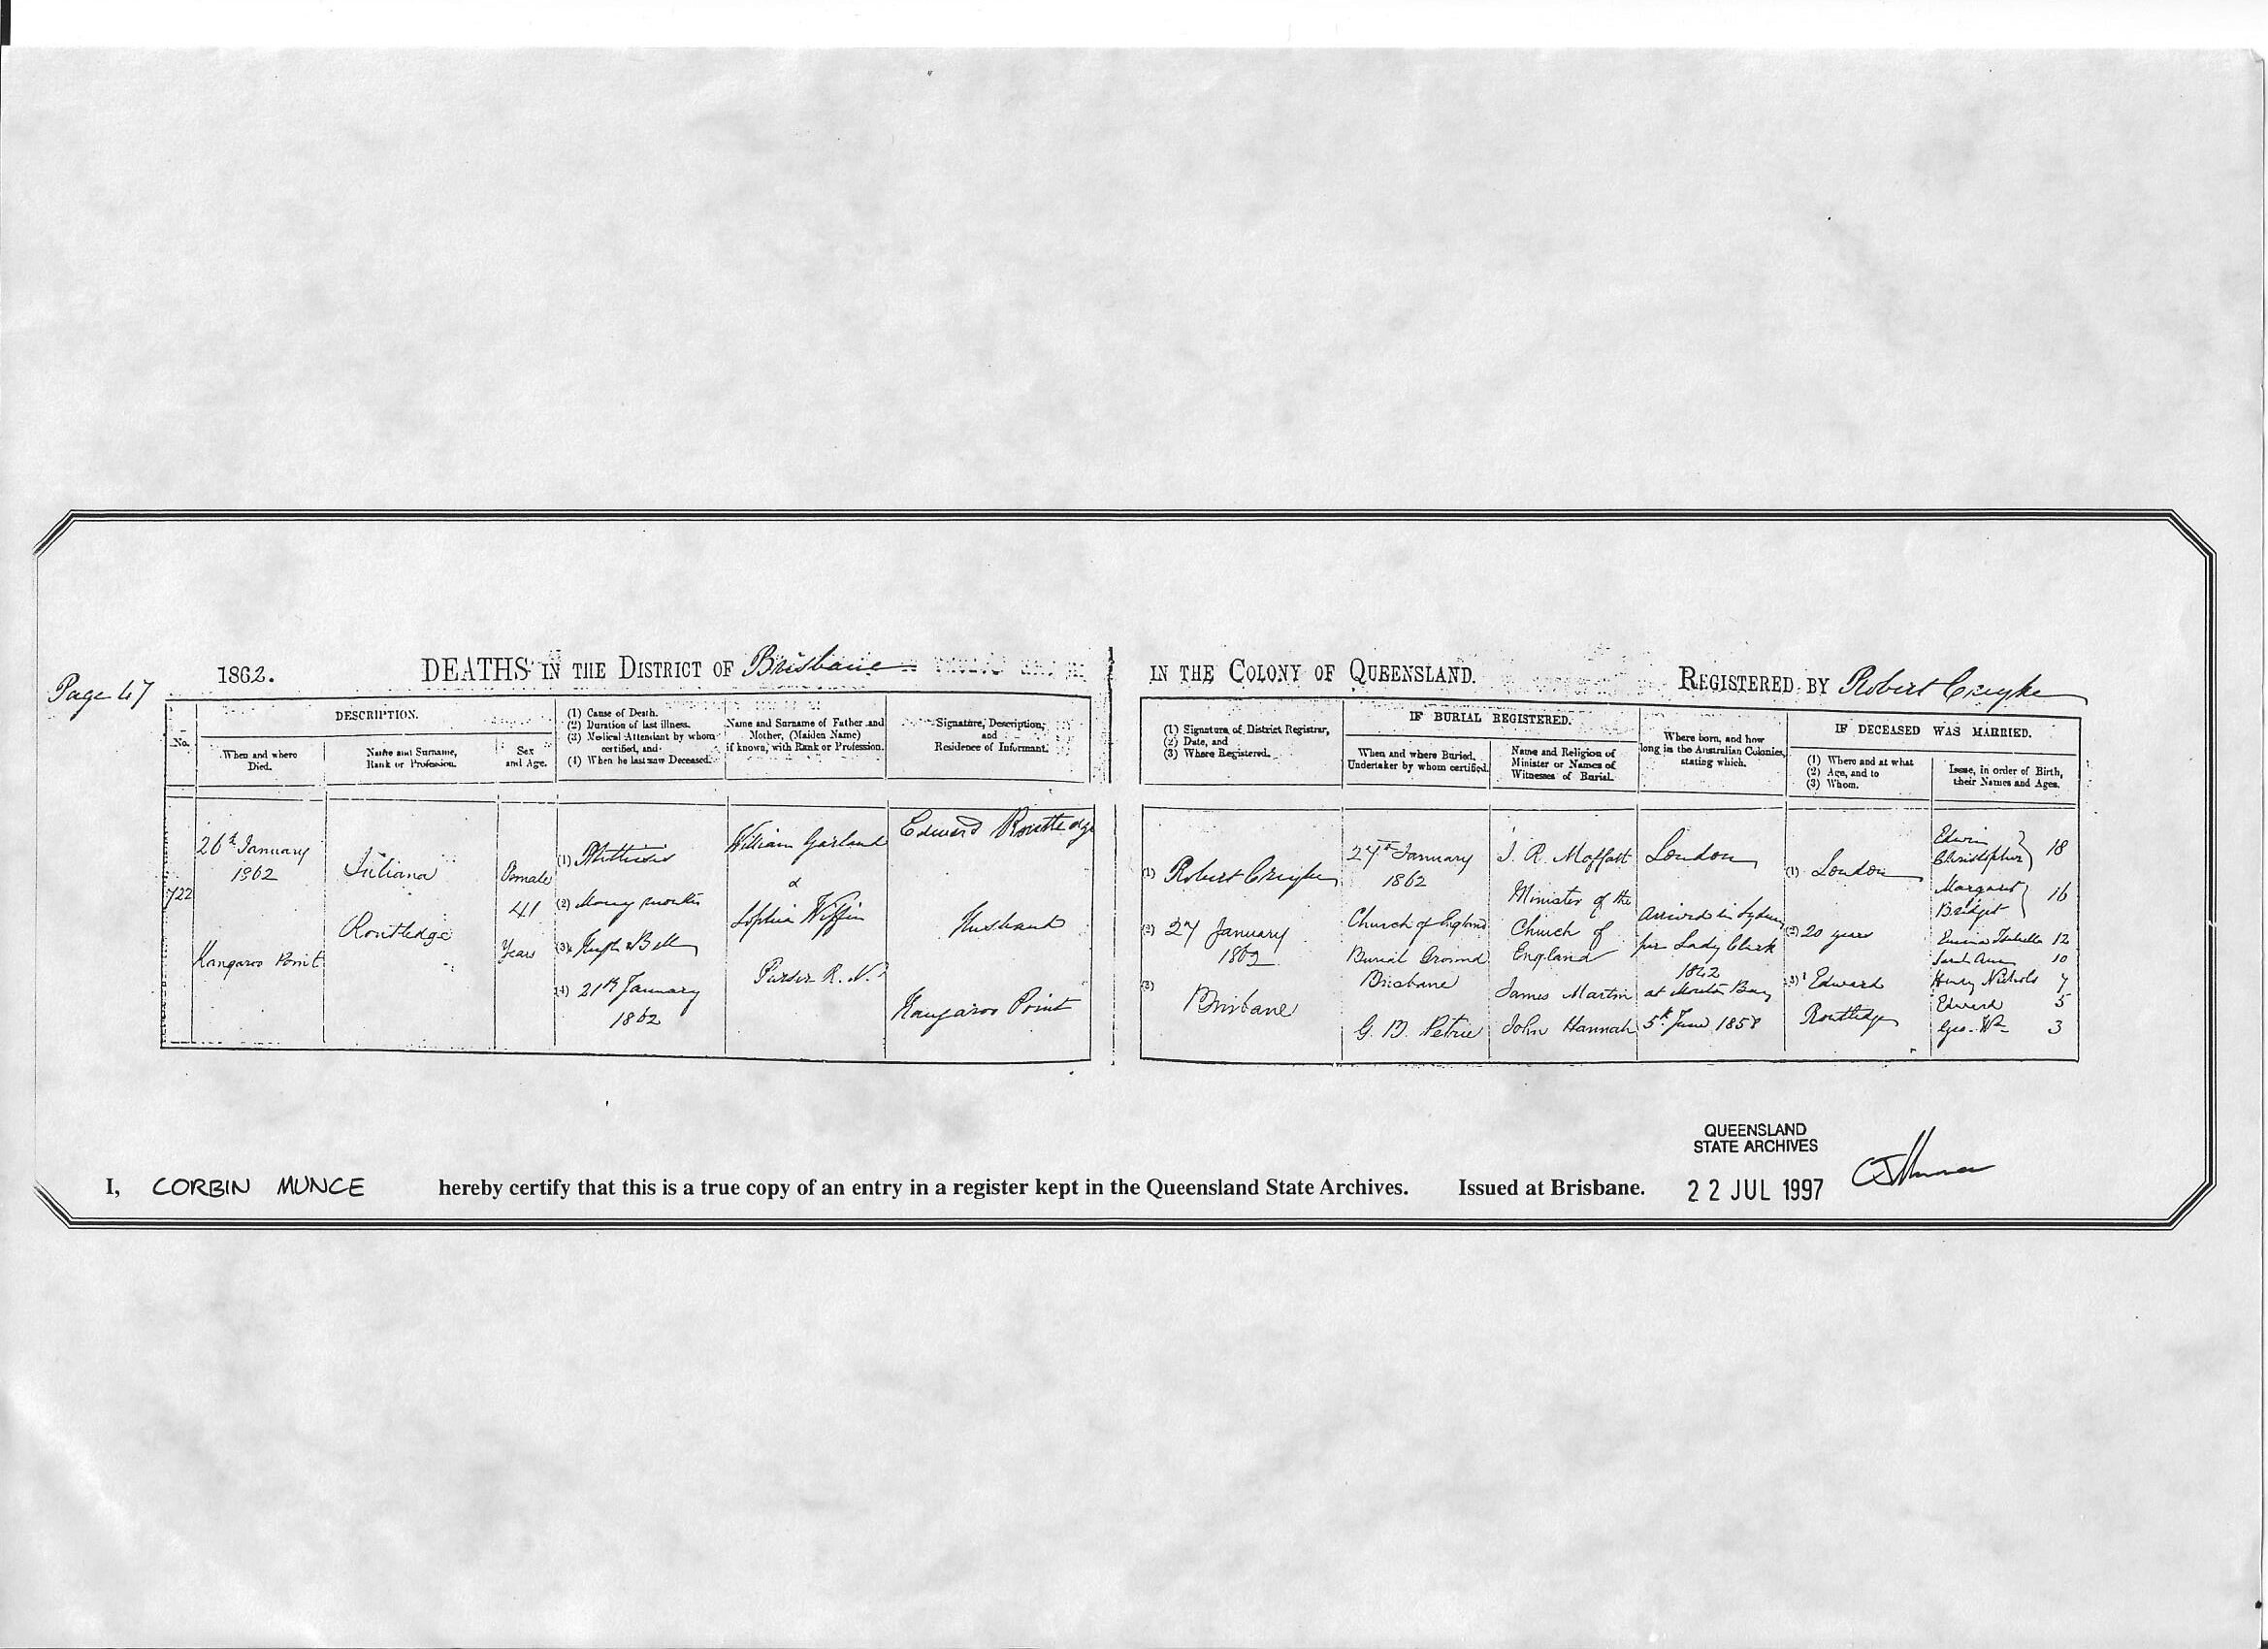 Death certificate of Juliana Routledge. Source: Private collection of Kay O'Brien.